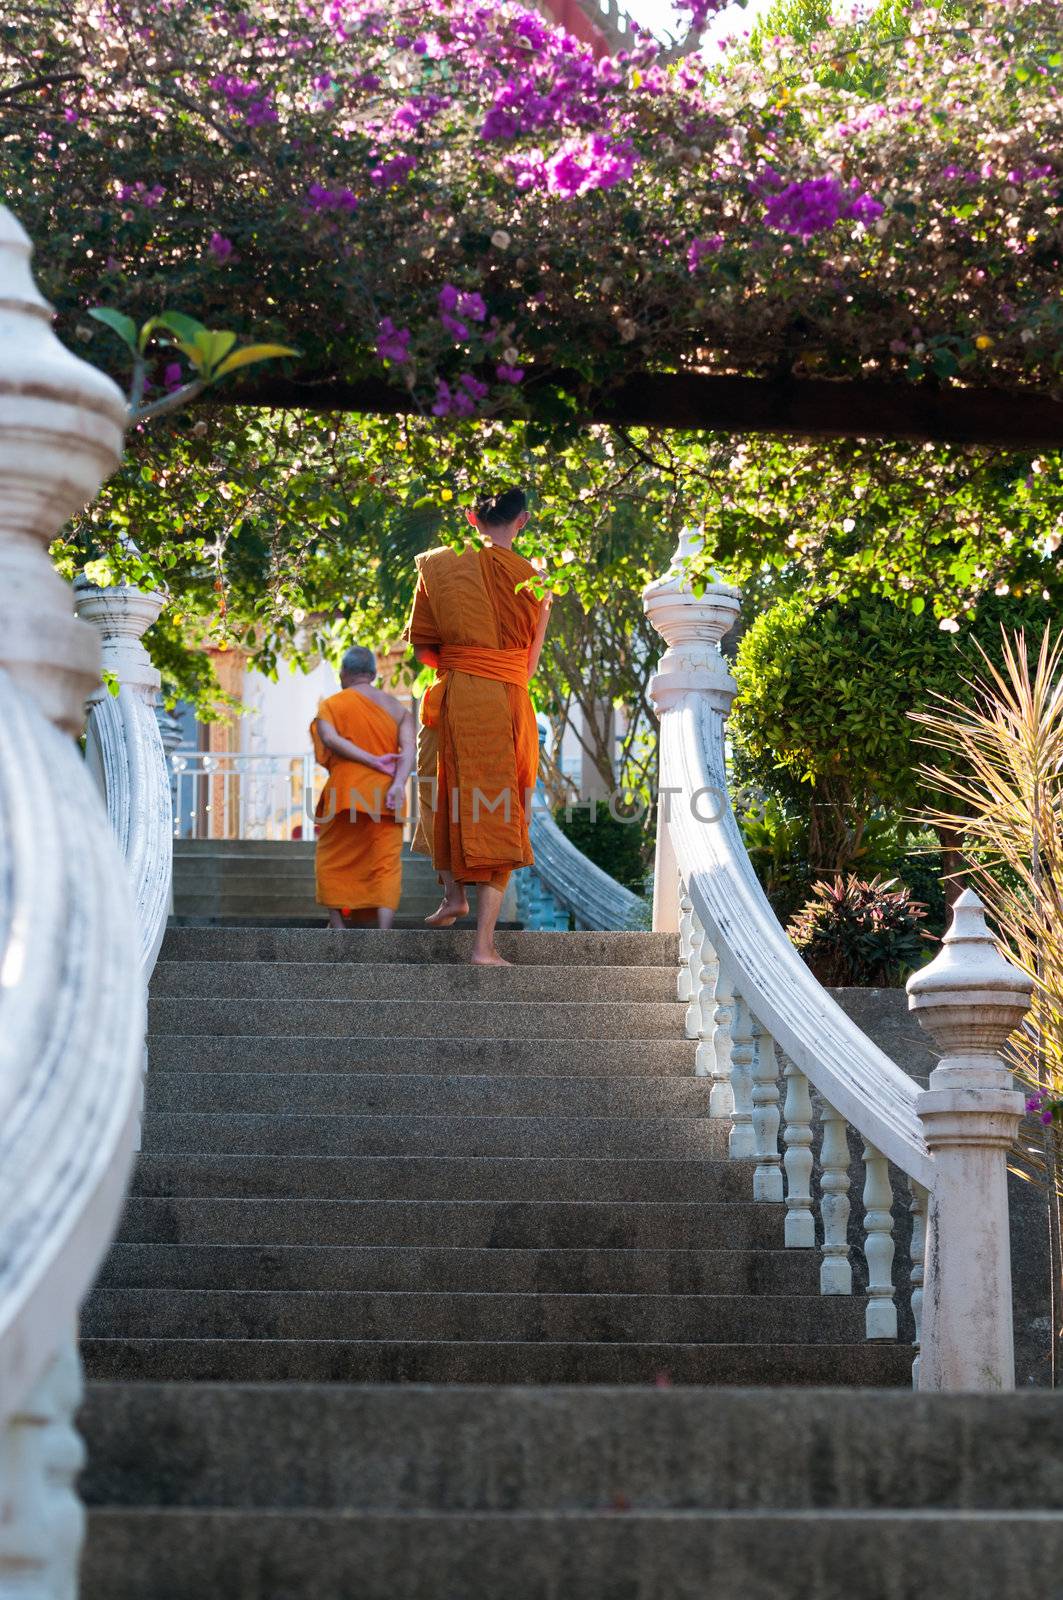 Phuket, Thailand - January 06, 2012: Two Buddhist monks on monastery stairs surrounded by flowers and trees. The monastery is in Wat Sapum Thammaram.